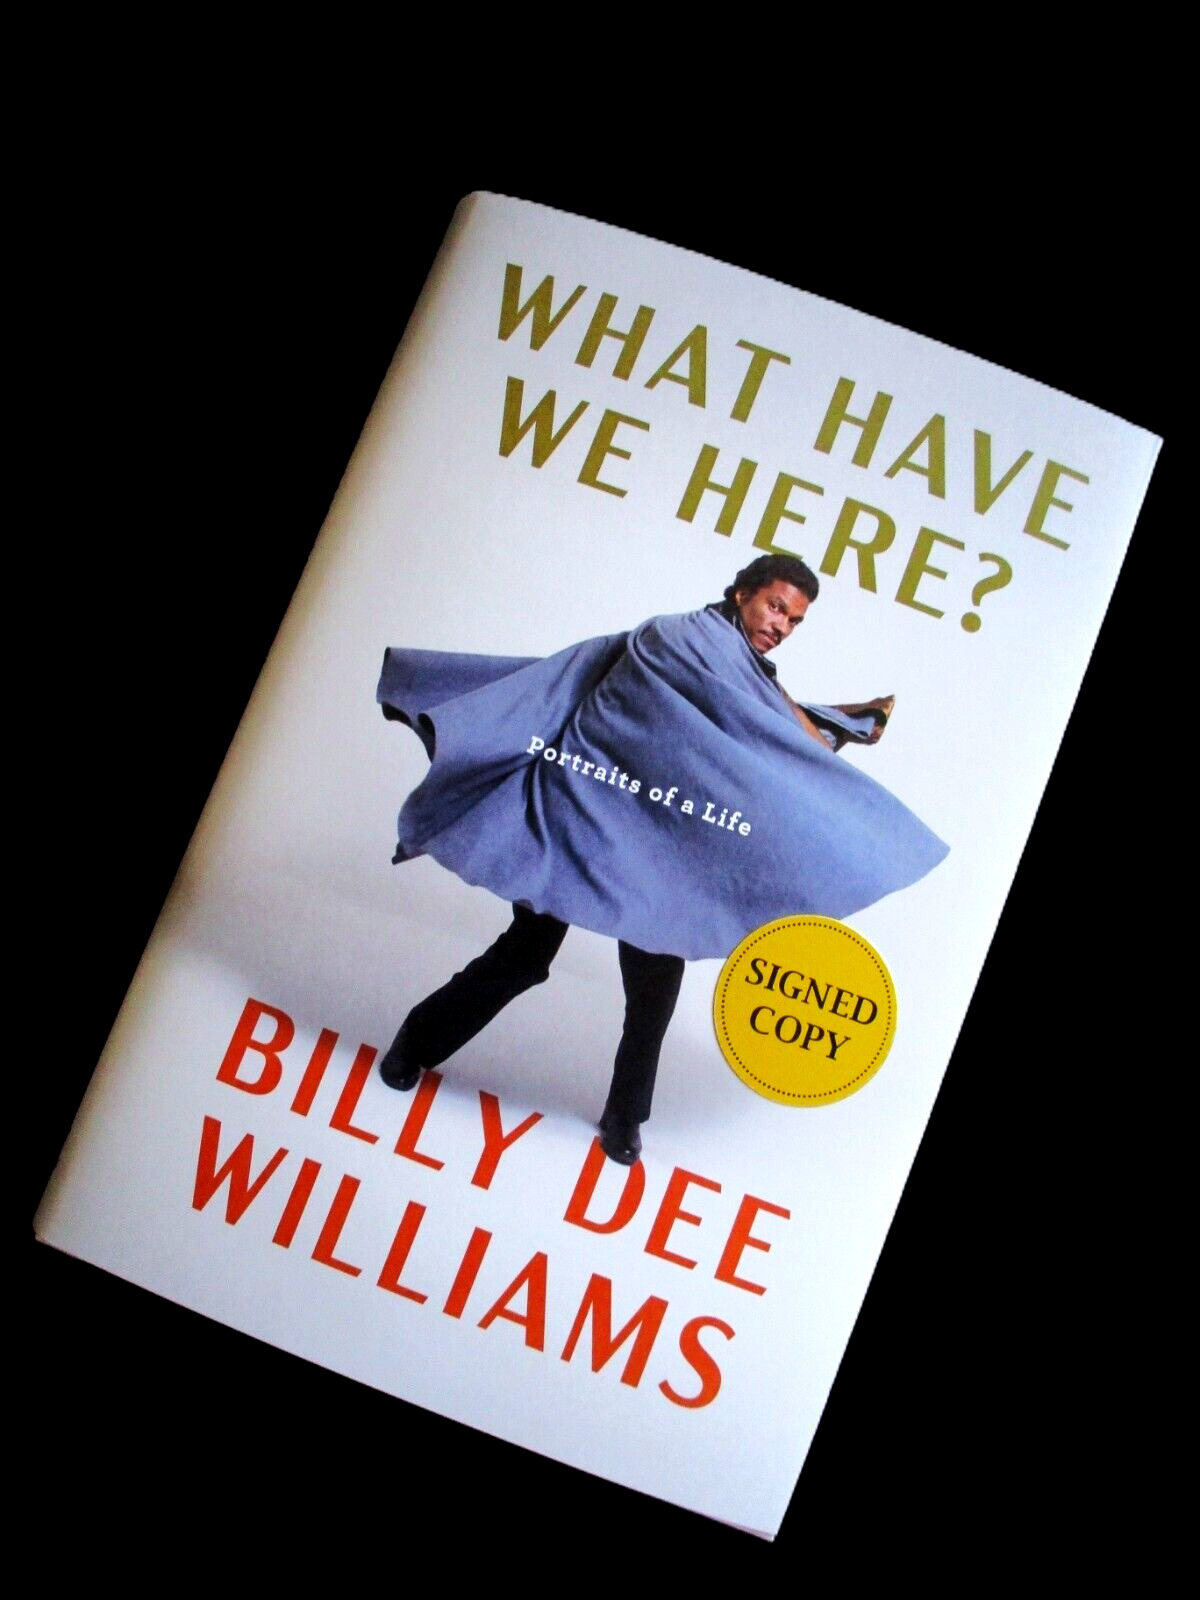 SIGNED BILLY DEE WILLIAMS WHAT HAVE WE HERE? FIRST EDITION HARDCOVER AUTOGRAPH